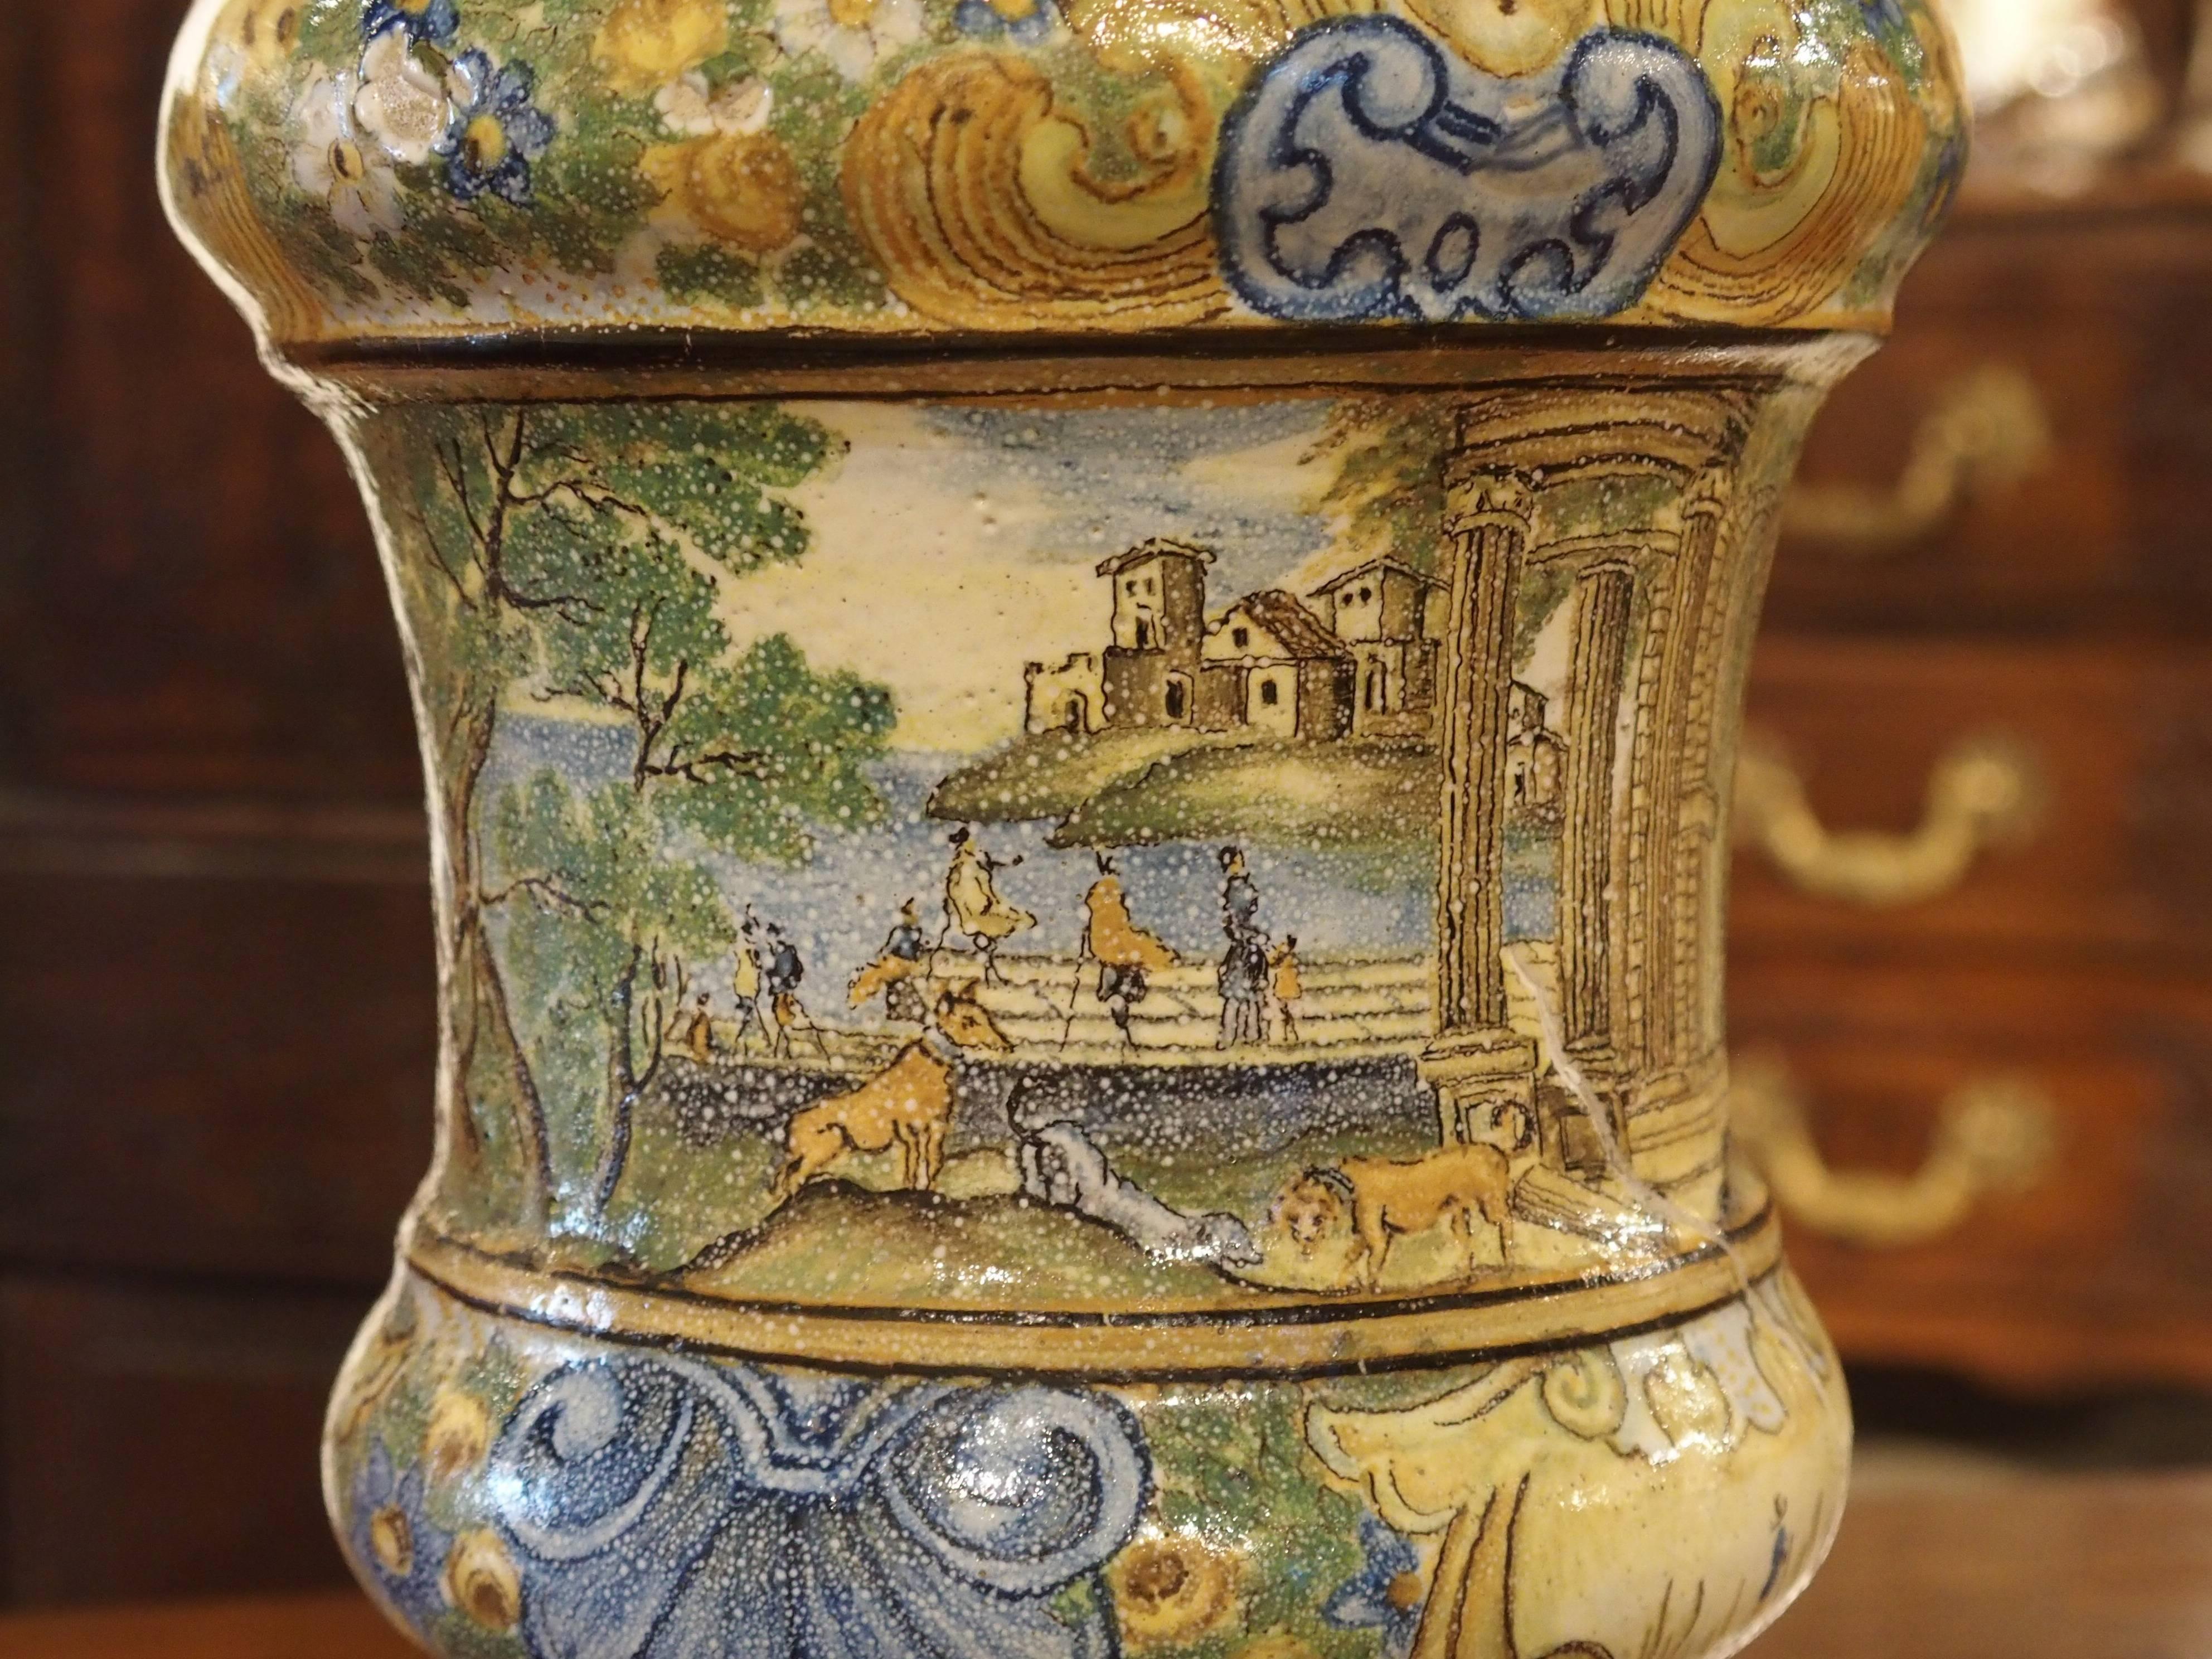 Small Antique Ceramic Urn from Italy, Early 1800s 2